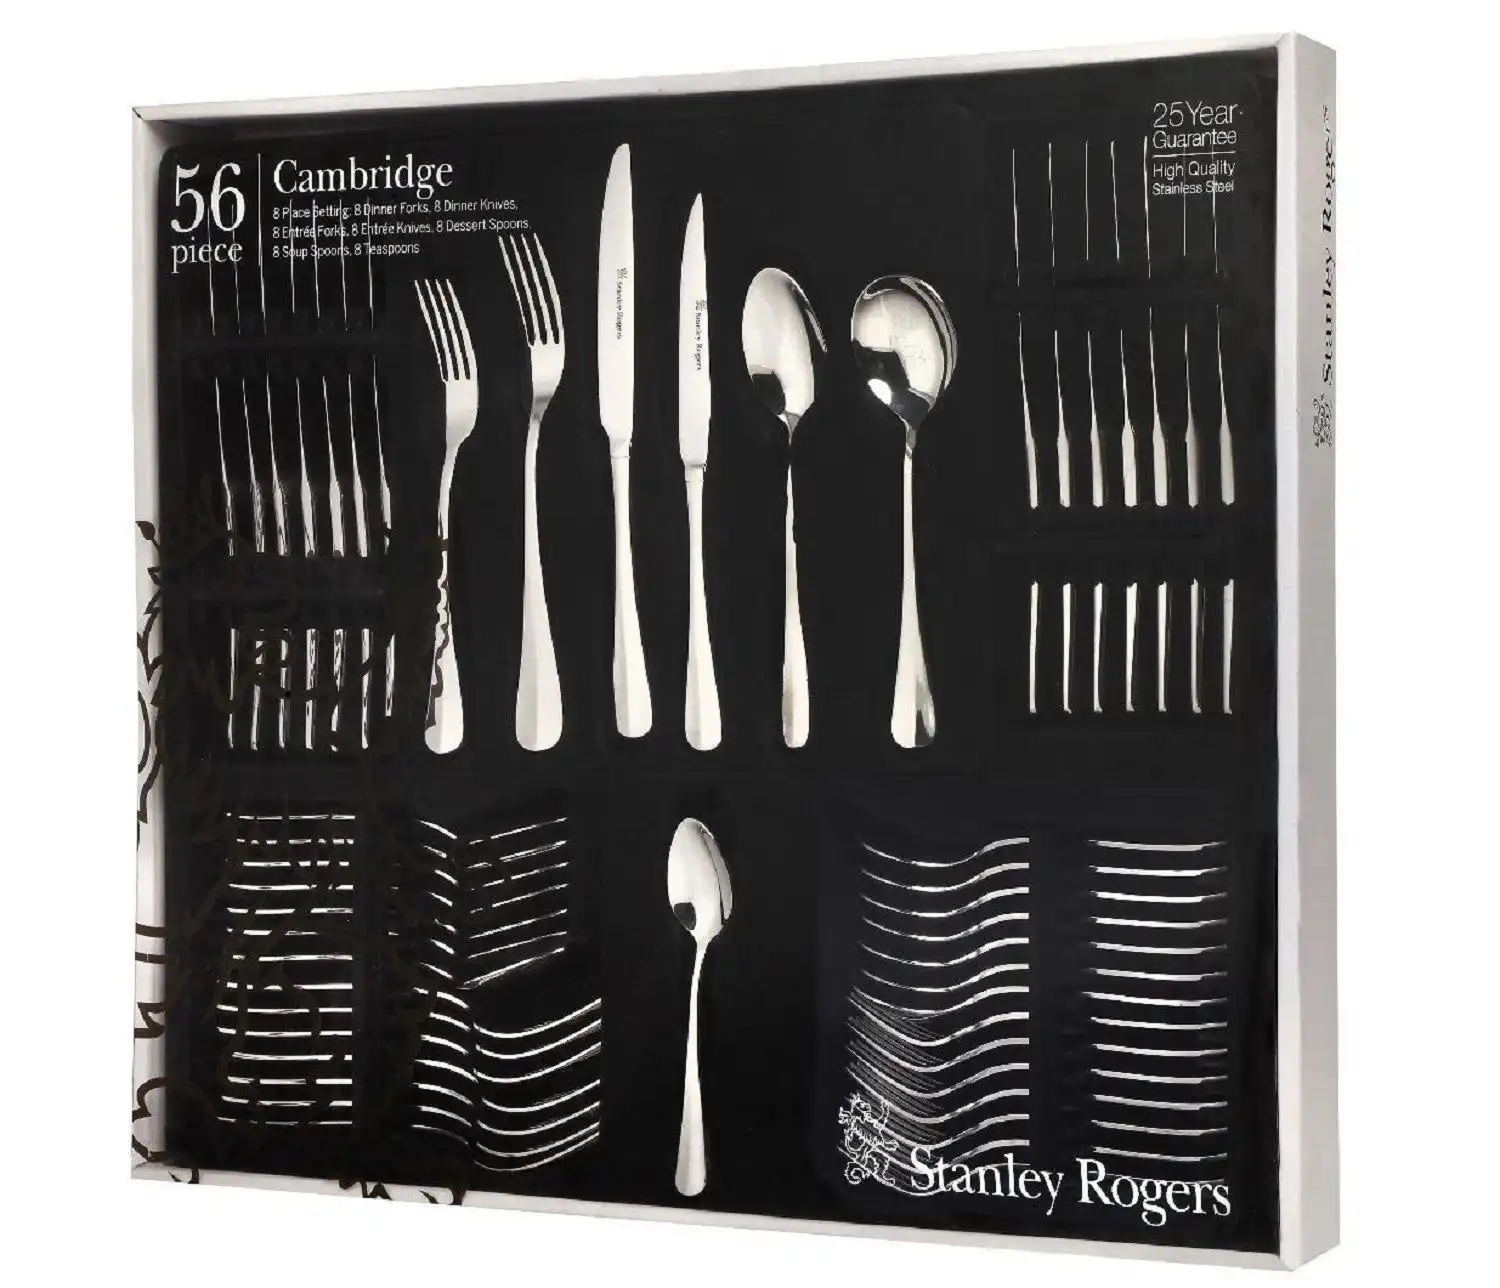 Stanley Rogers 56 Piece Cambridge Cutlery Gift Boxed Set